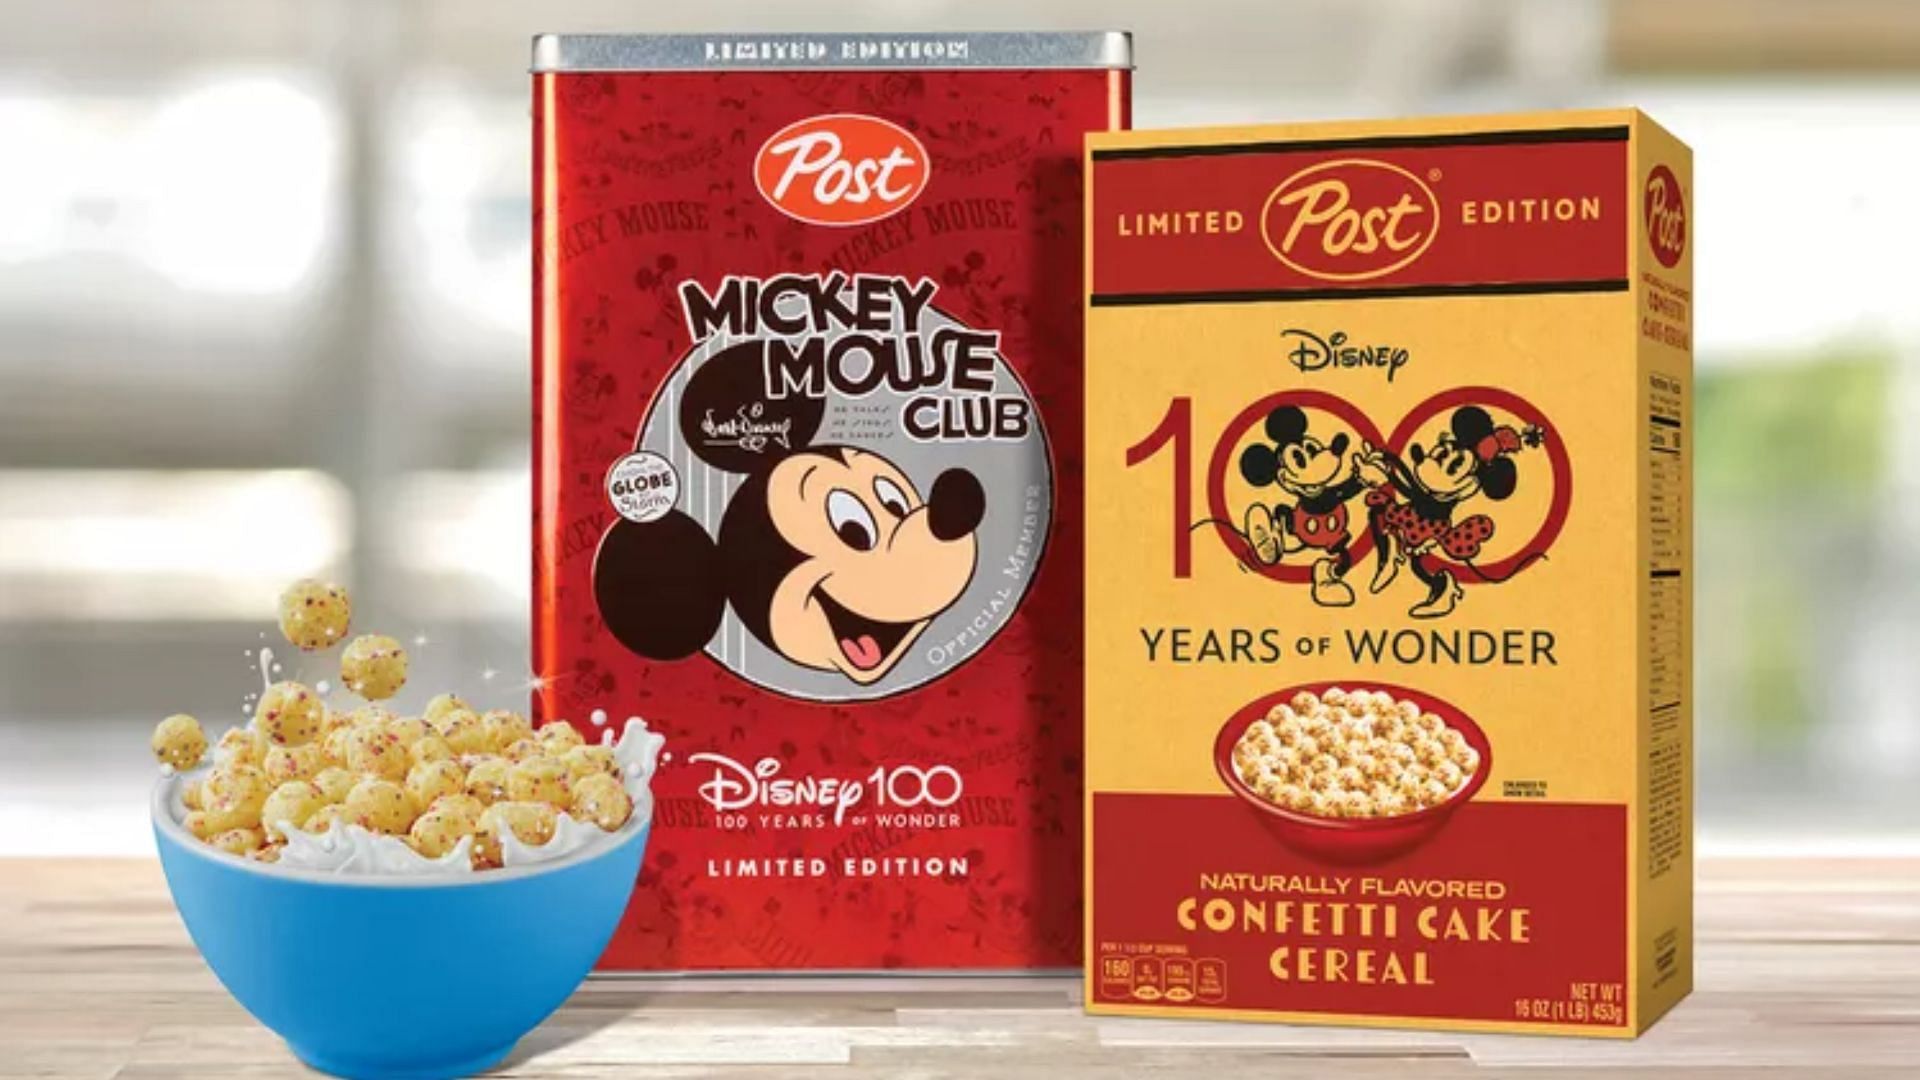 the collector&#039;s edition Disney cereals tin case will be available in very limited numbers at a price of $40 (Image via Post Cereals)